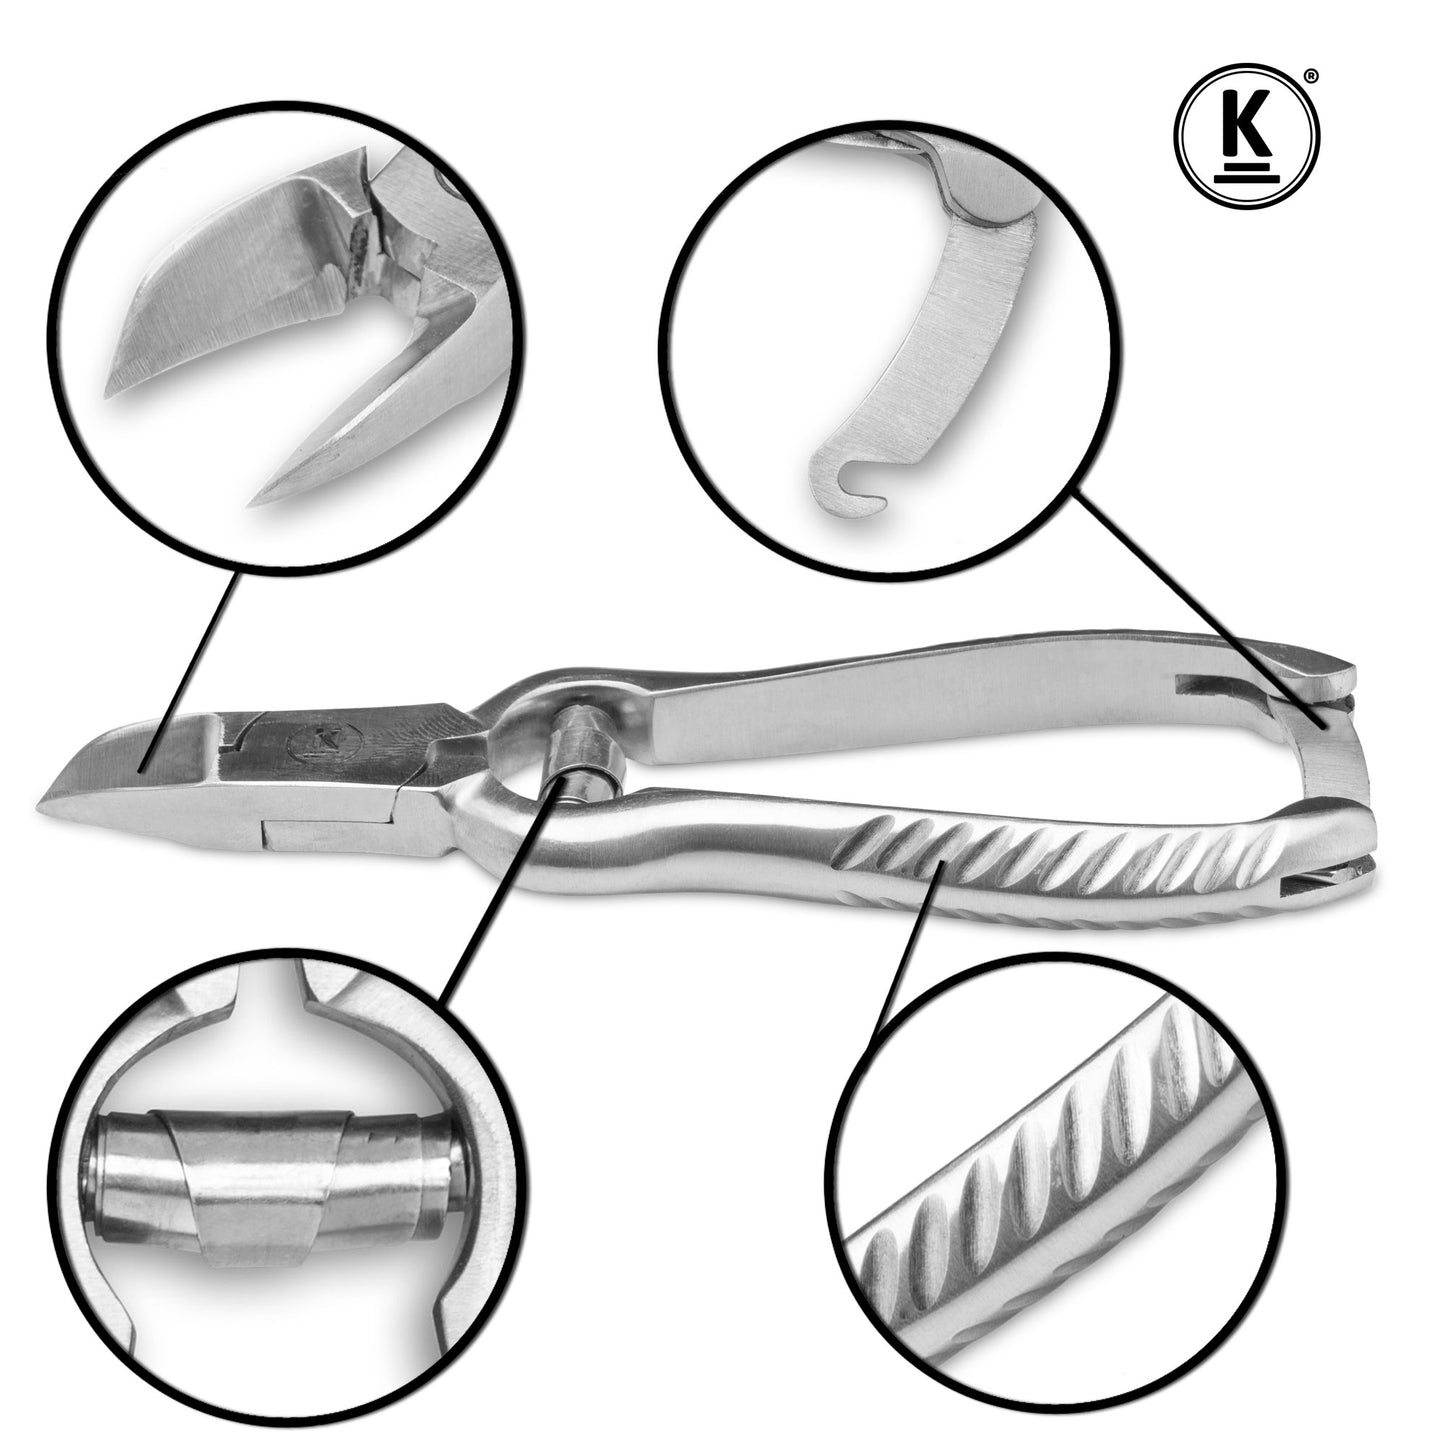 Nail clippers for strong toenails - 14 cm